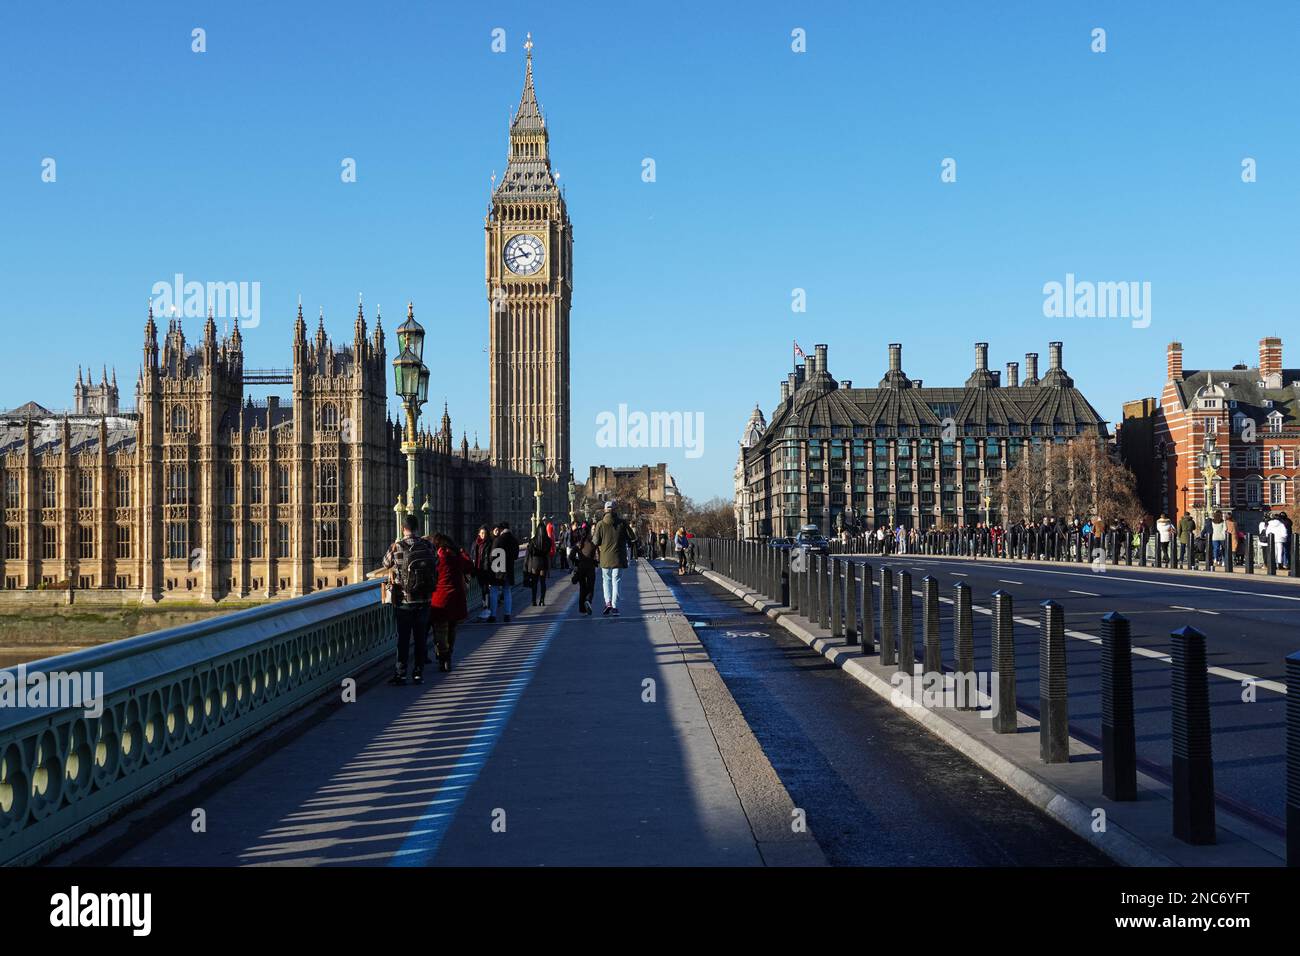 Tourists on Westminster Bridge with the Big Ben clock tower and the Palace of Westminster in the background, London England United Kingdom UK Stock Photo